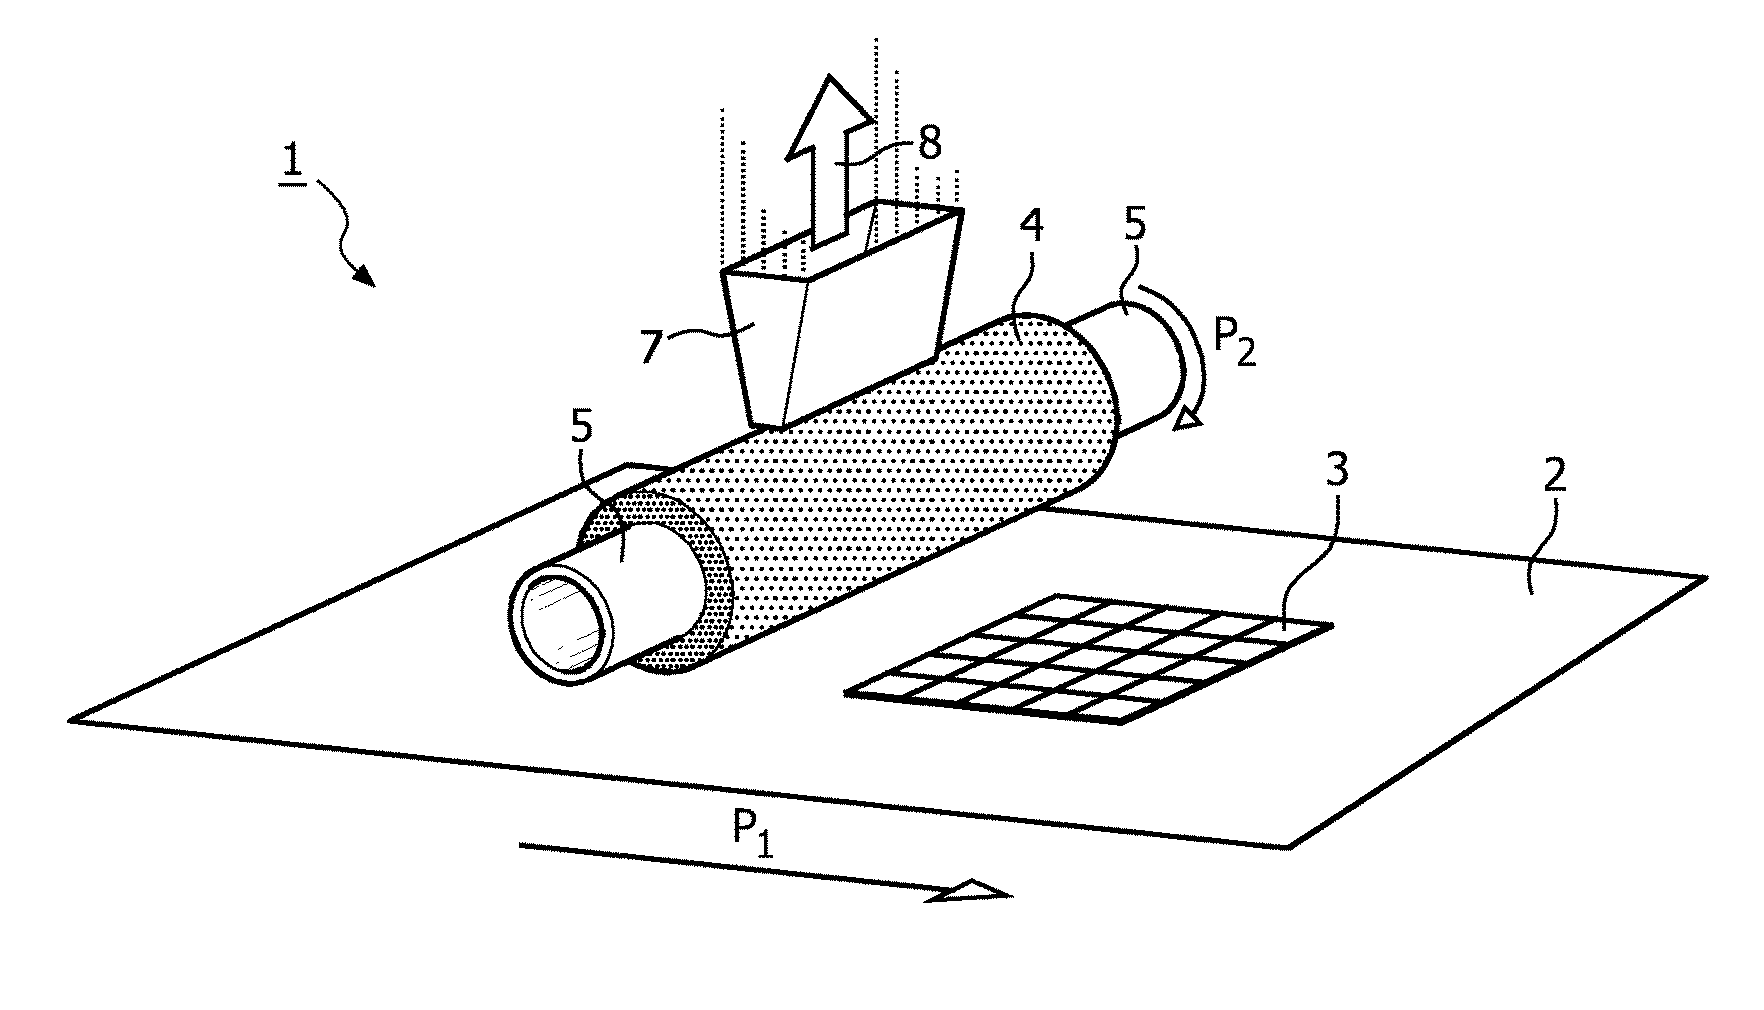 Device and method for drying separated electronic components